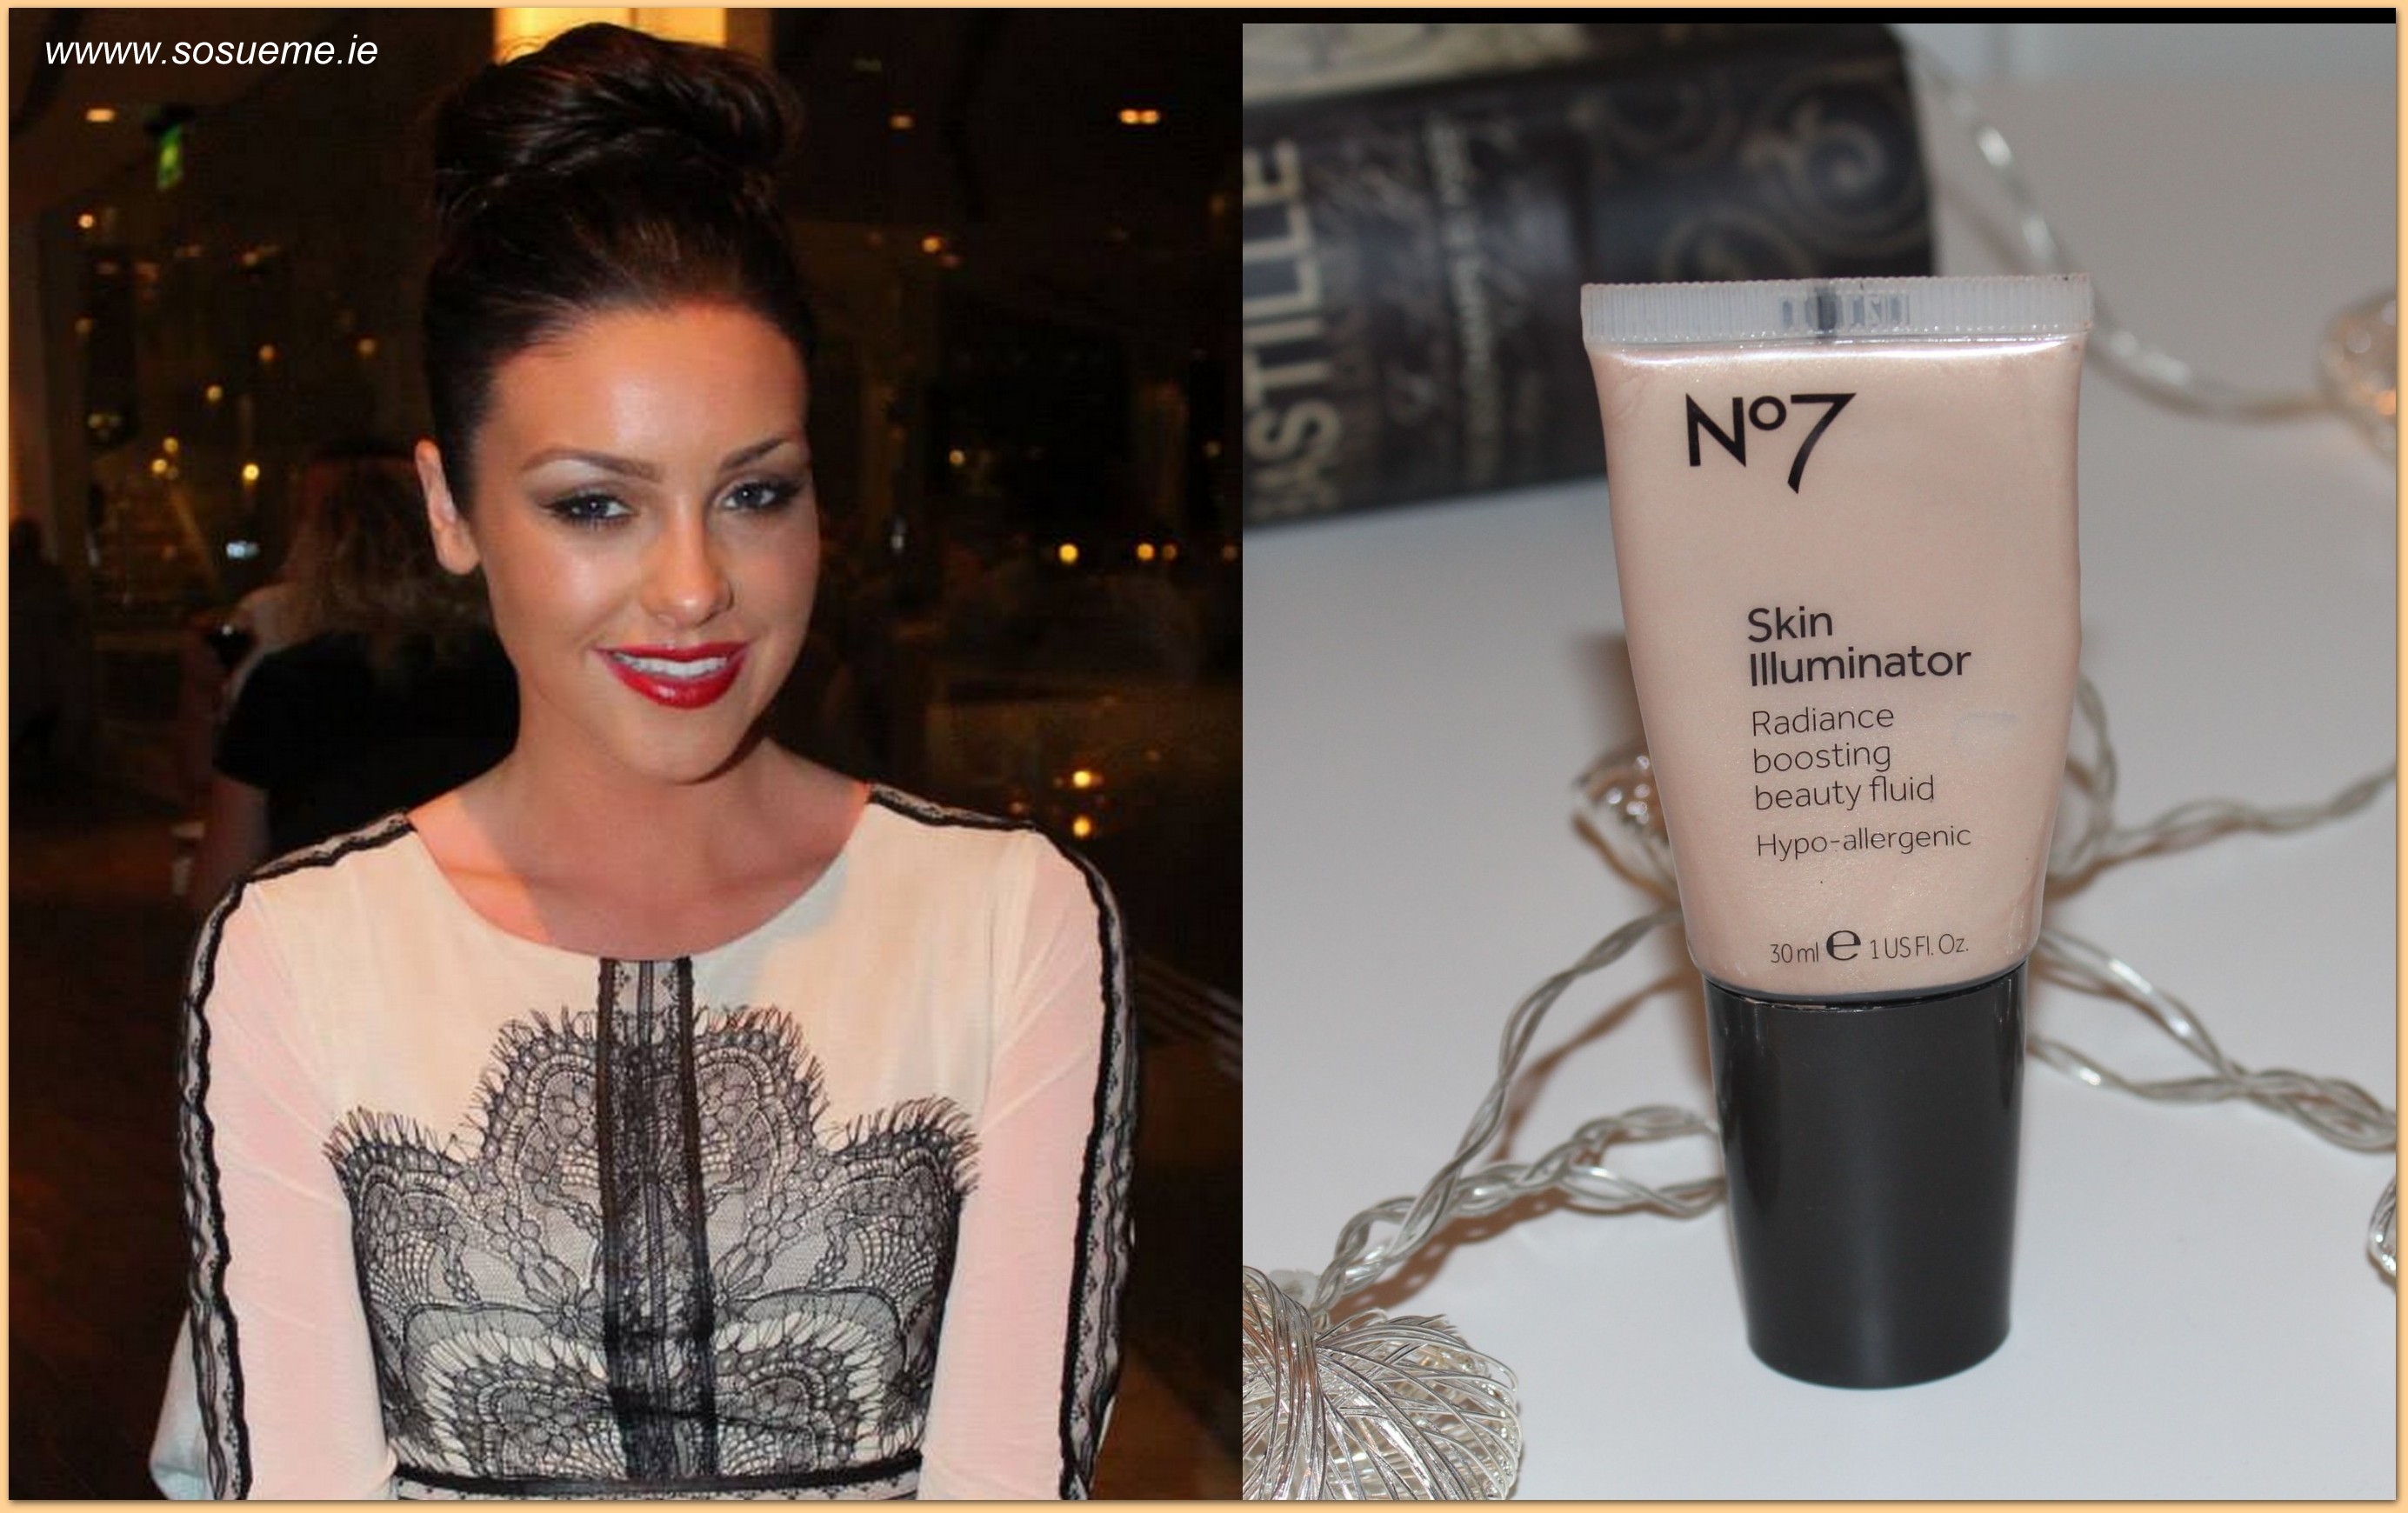 Review The No7 Skin Illuminator Radiance Boosting Beauty